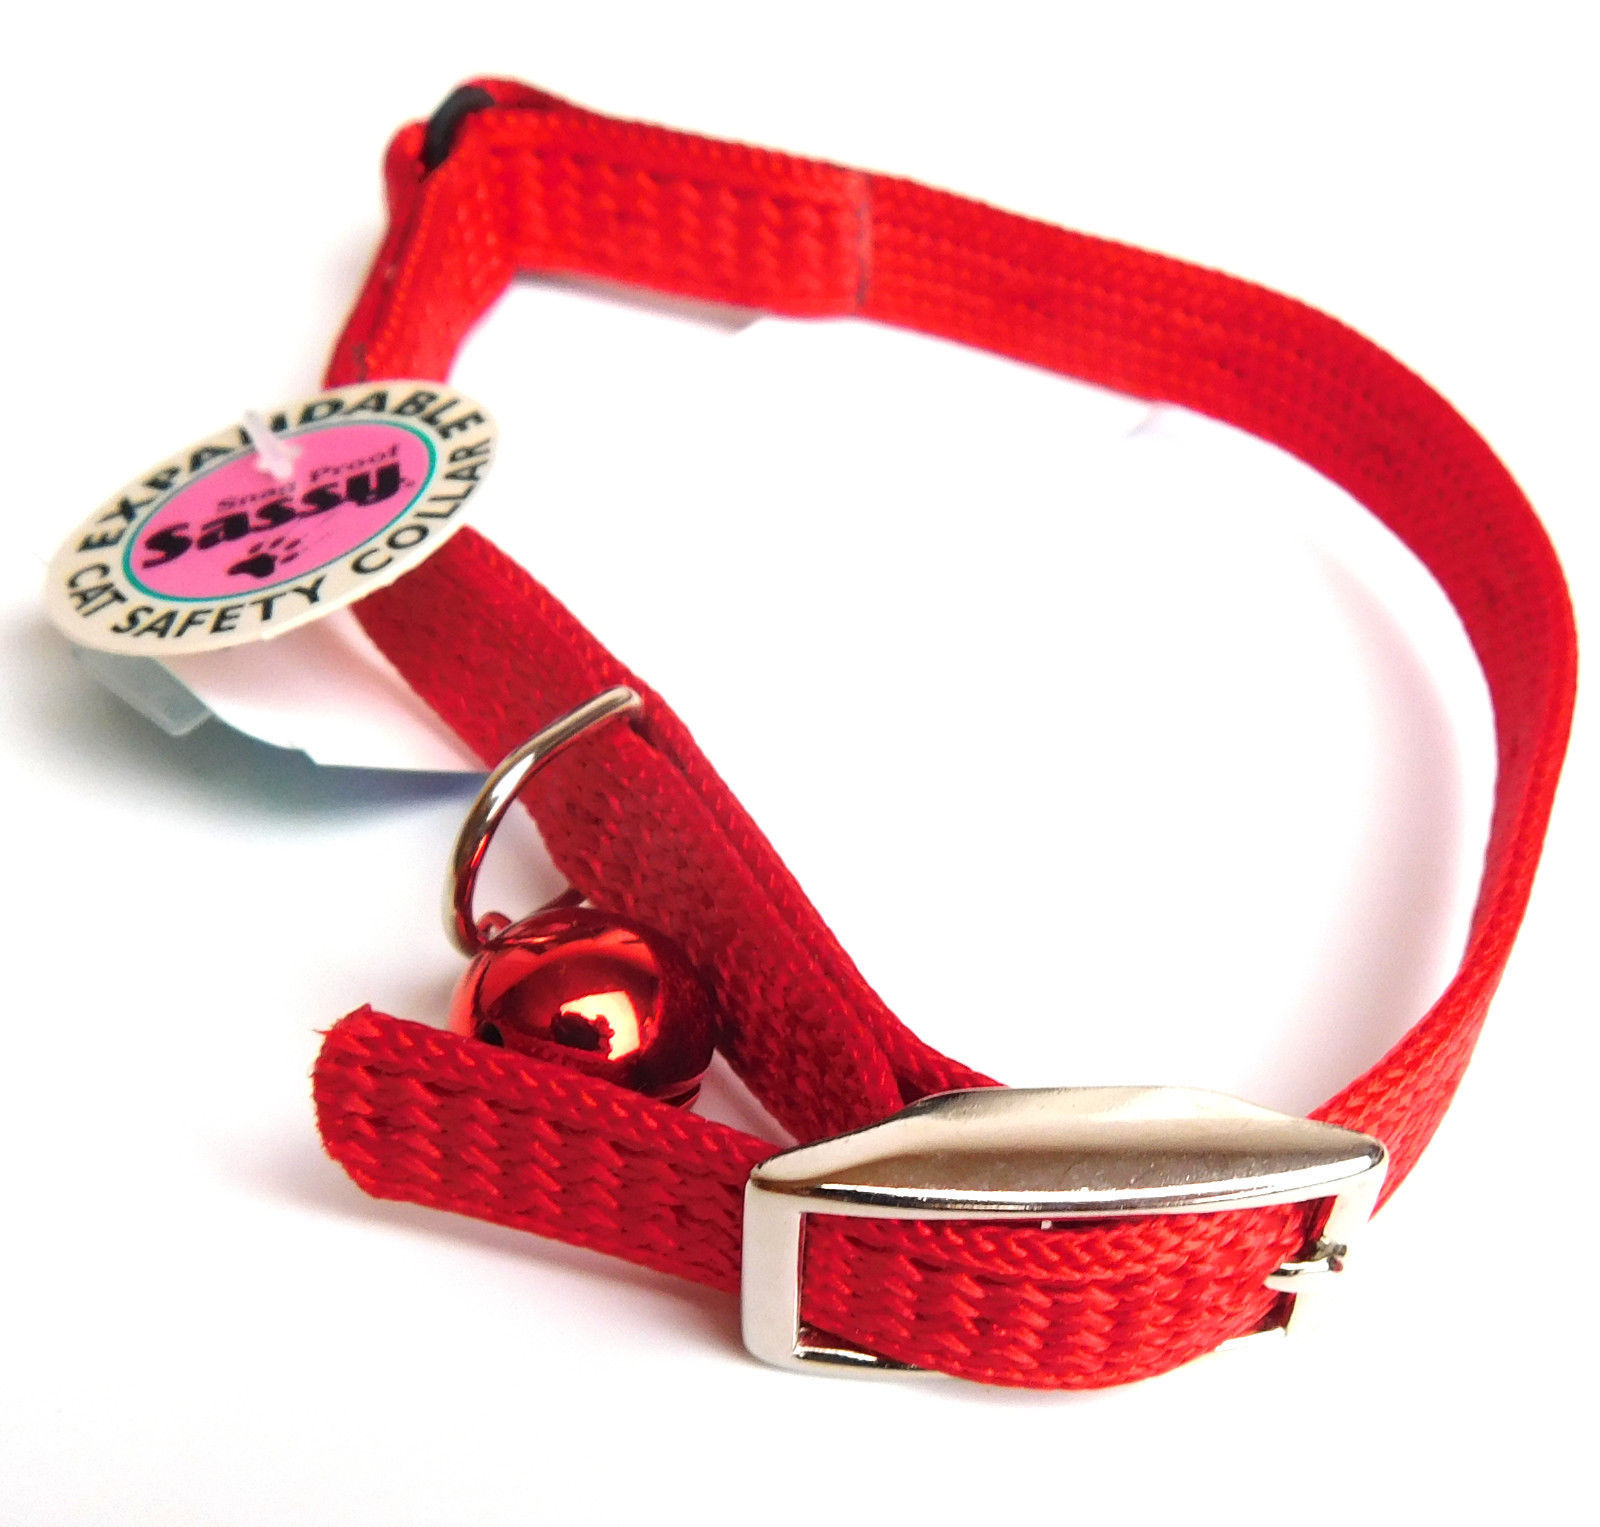 Cat Safety Collar Expandable Snag Proof "RED" Coastal Pet Products 9511s - $5.99